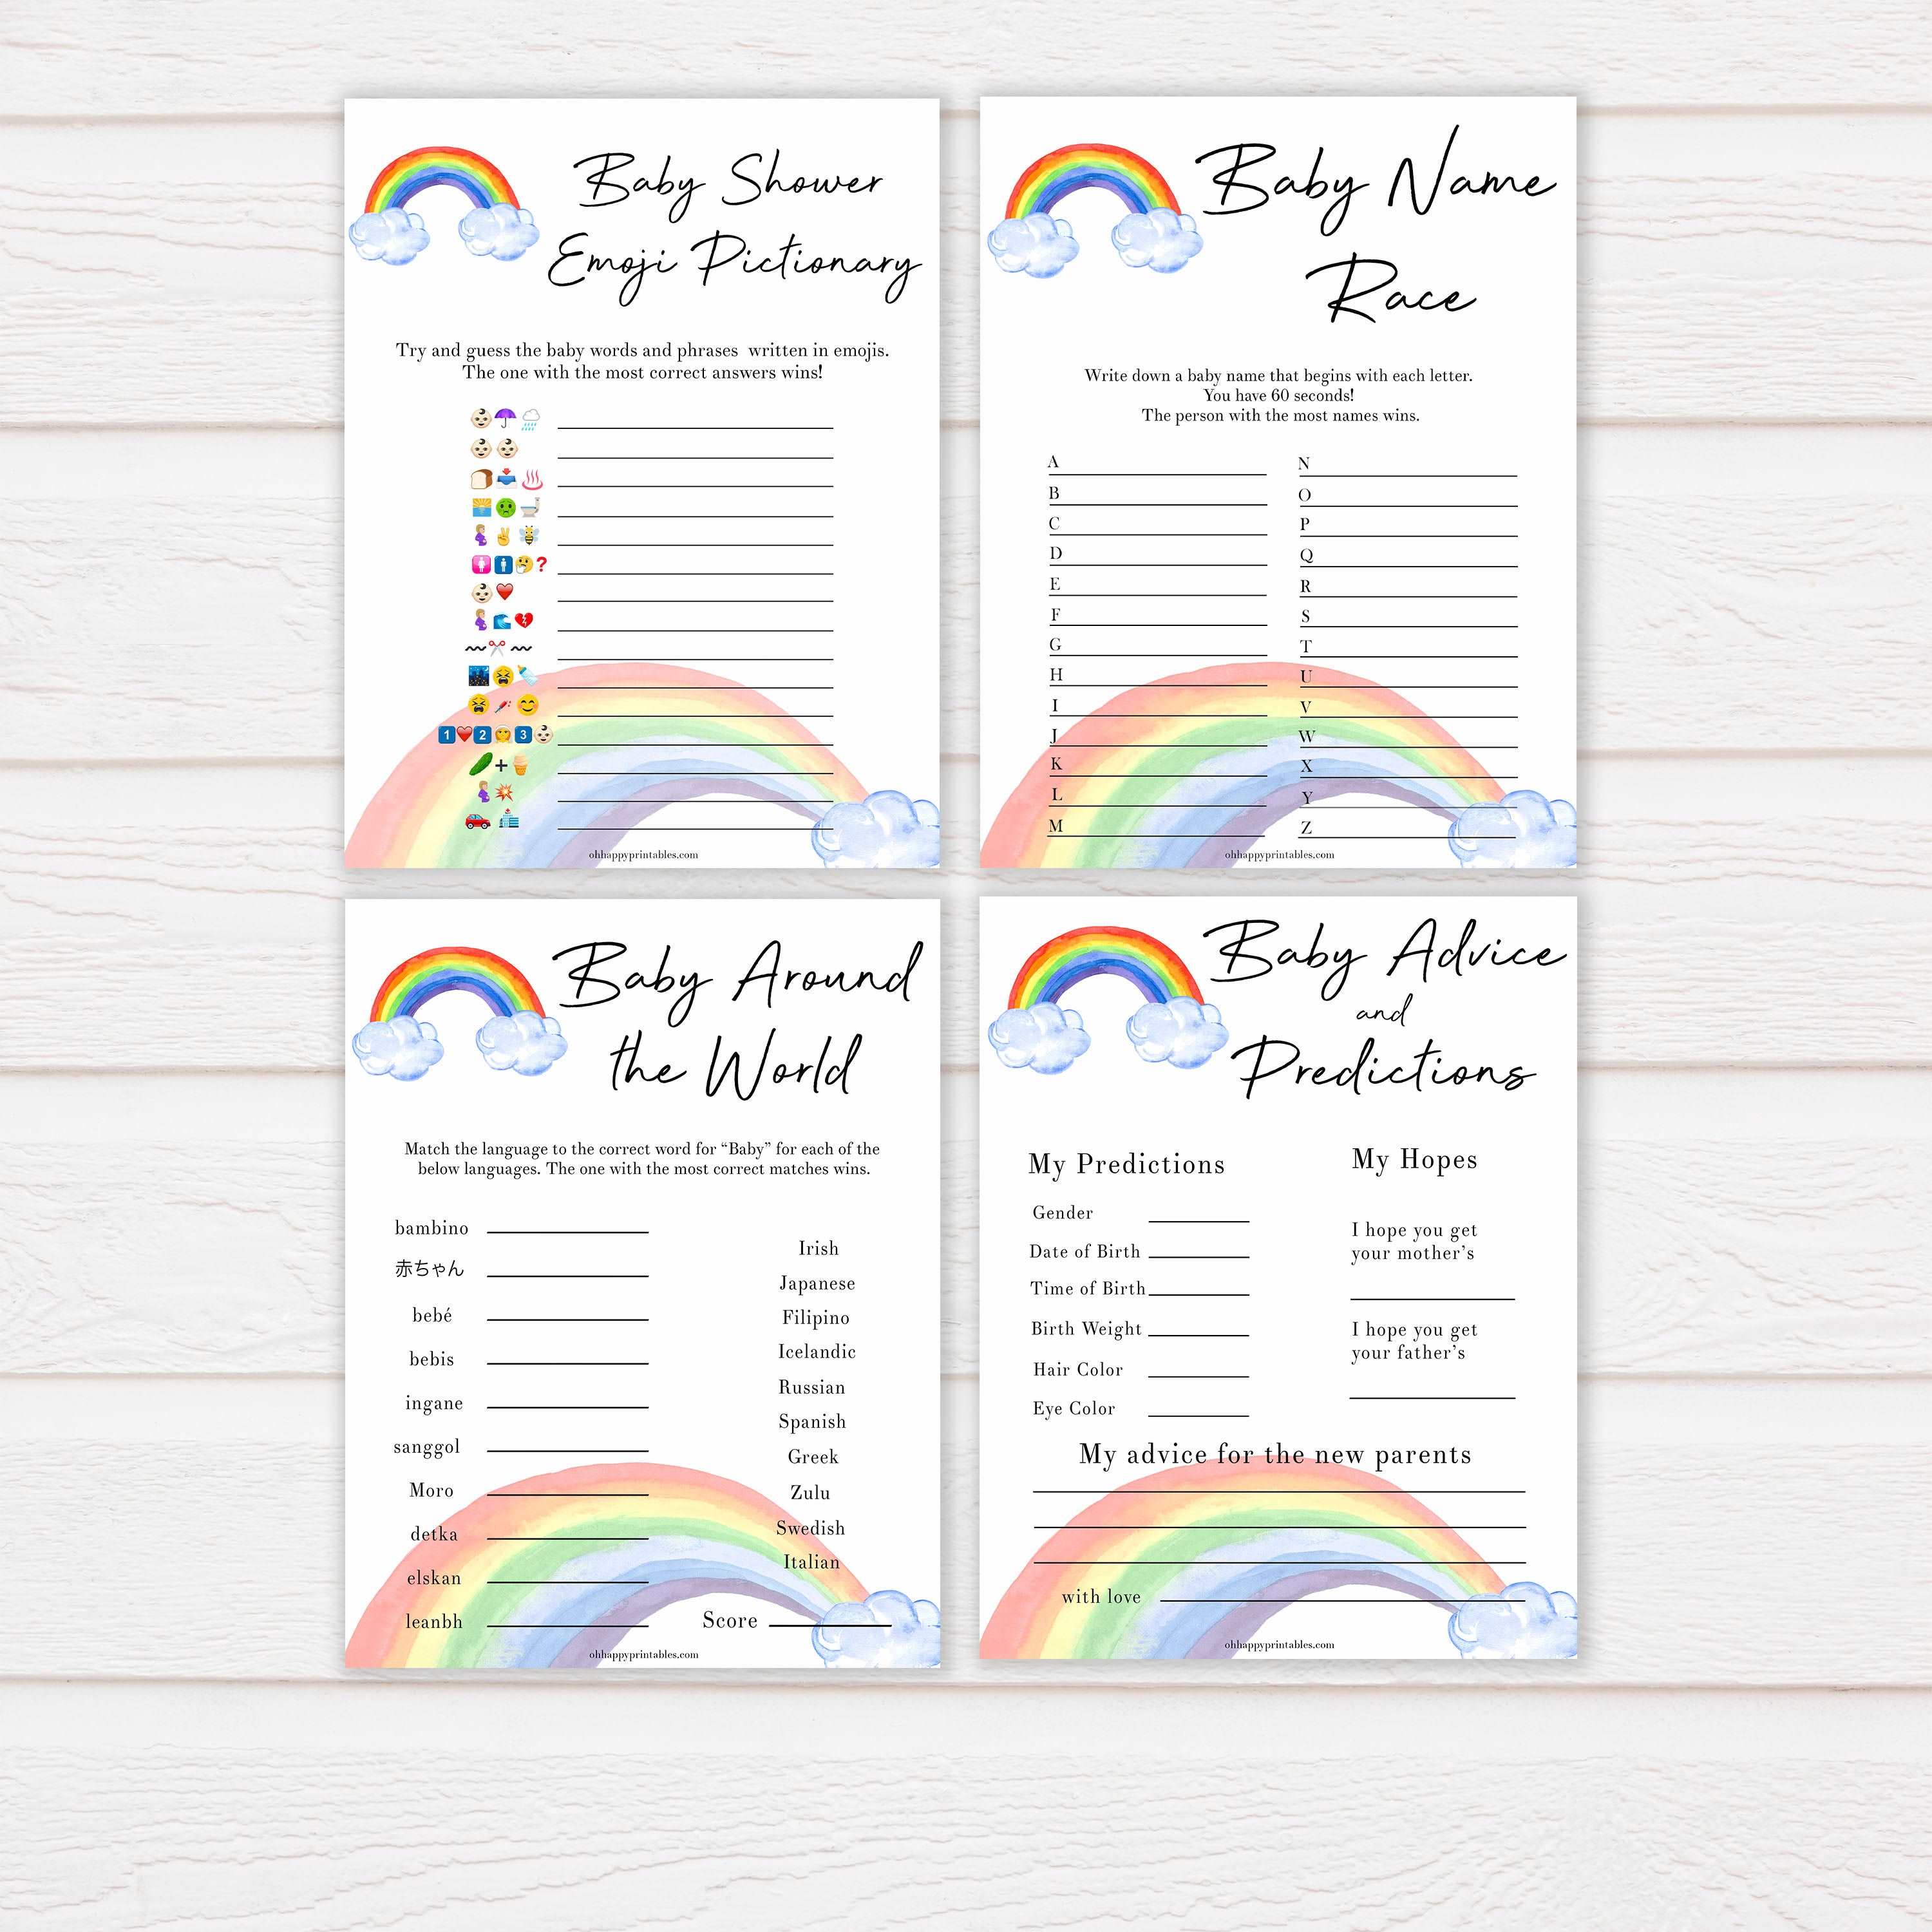 Rainbow baby games, rainbow 10 baby games, baby shower games bundle, rainbow printable baby games, instant download games, rainbow baby shower, printable baby games, fun baby games, popular baby games, top 10 baby games